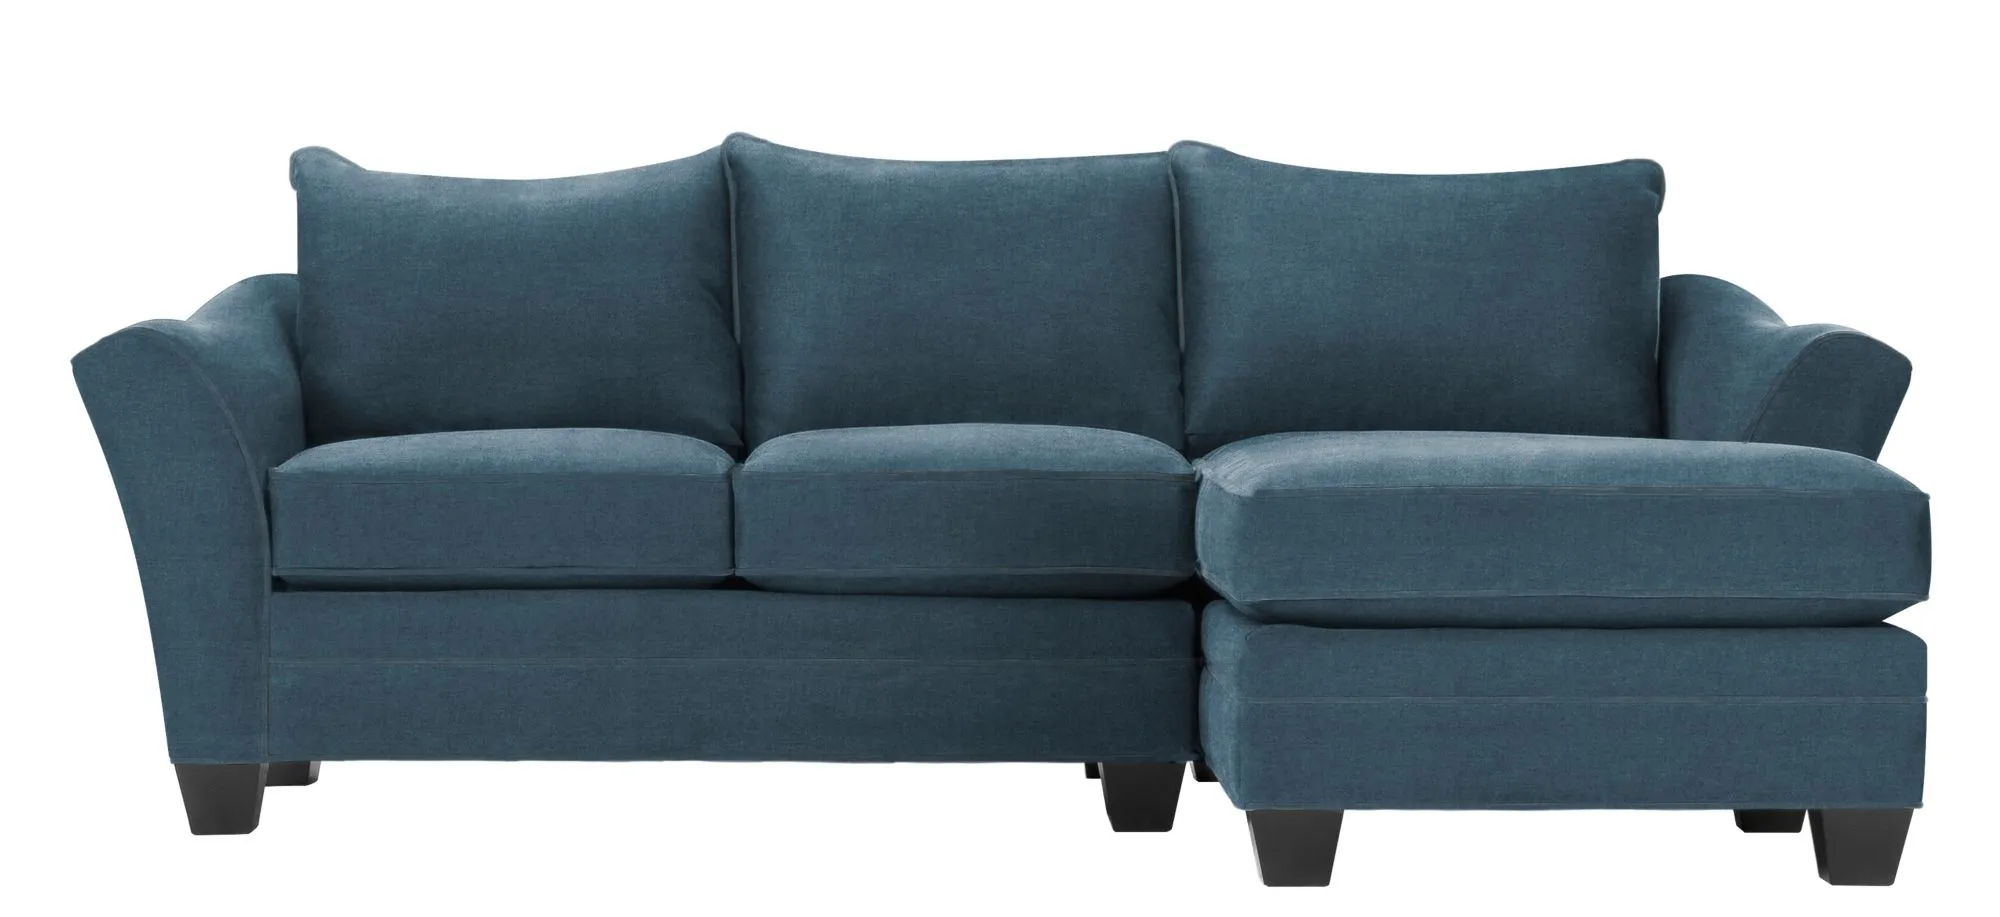 Foresthill 2-pc. Right Hand Chaise Sectional Sofa in Santa Rosa Denim by H.M. Richards